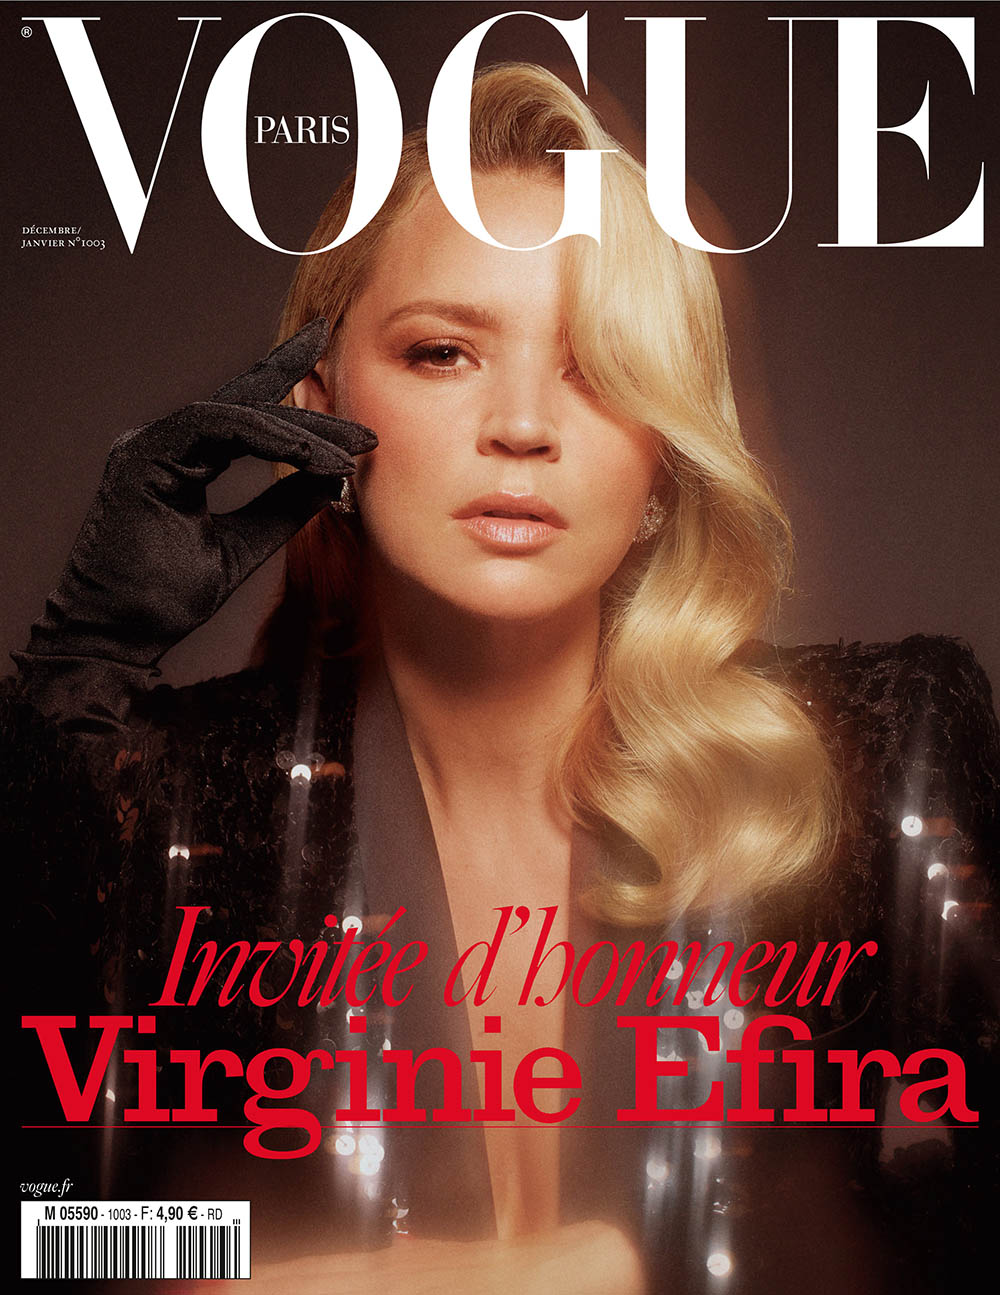 Virginie Efira covers Vogue Paris December 2019 January 2020 by Mikael Jansson